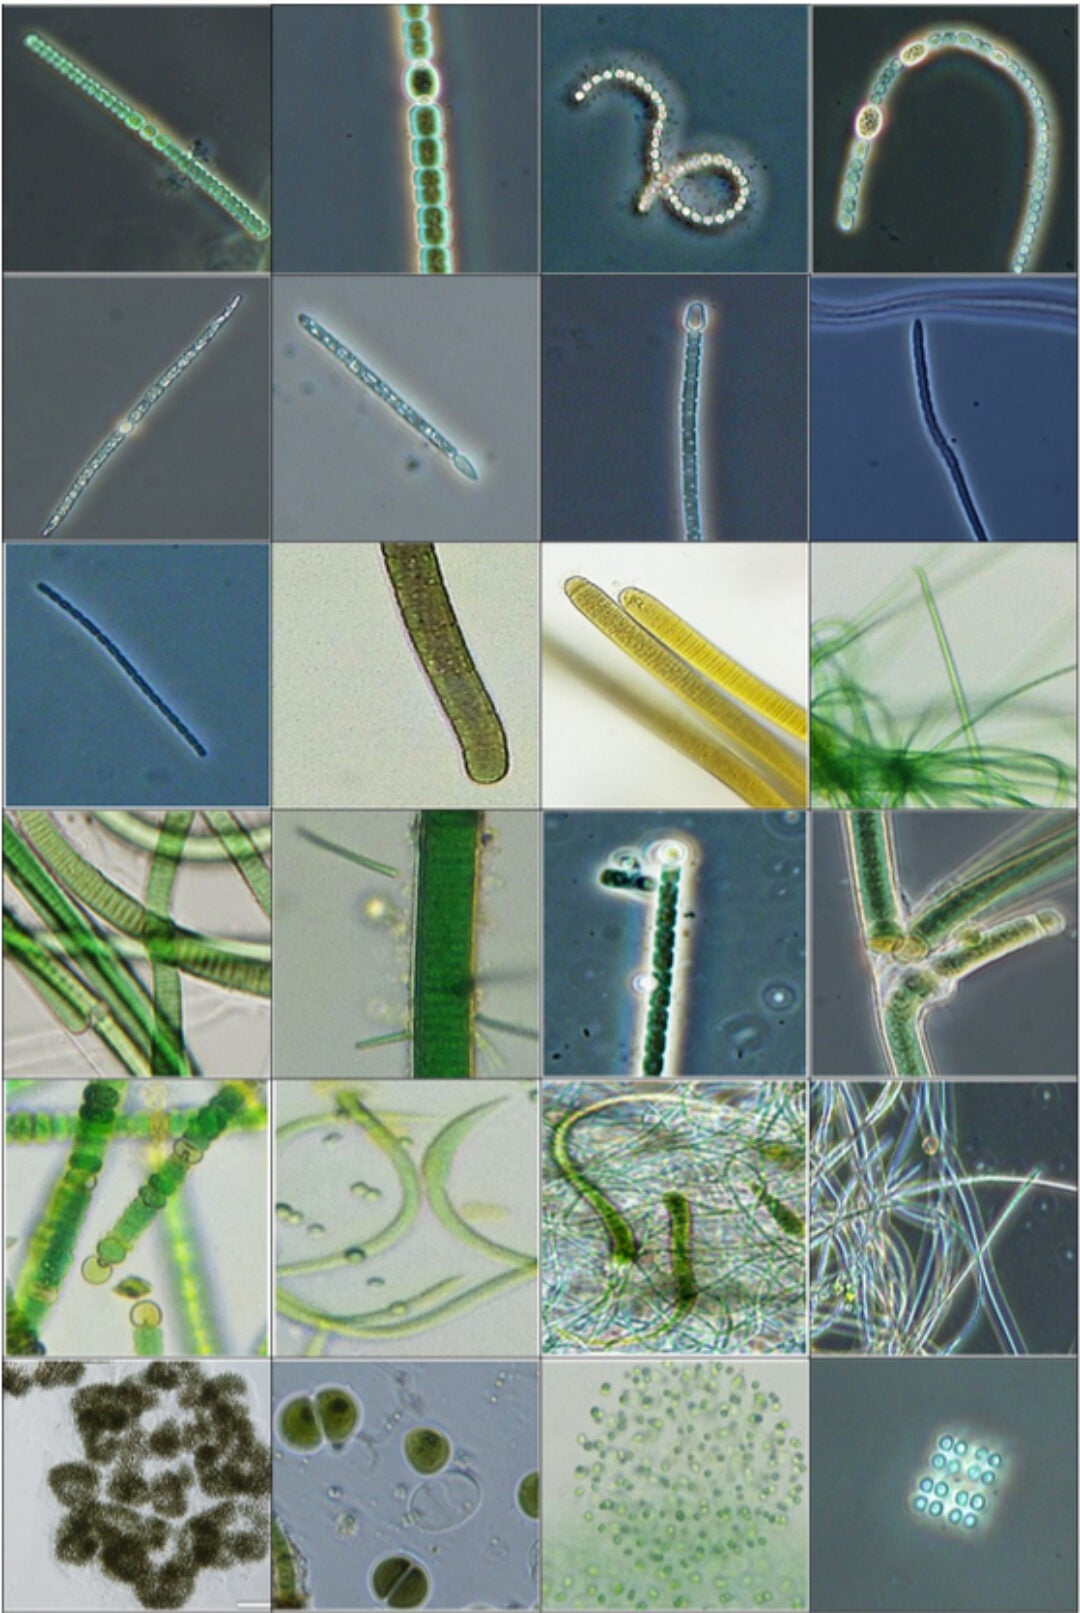 Microscopic picture of cyanobacterial species found in samples within this study.